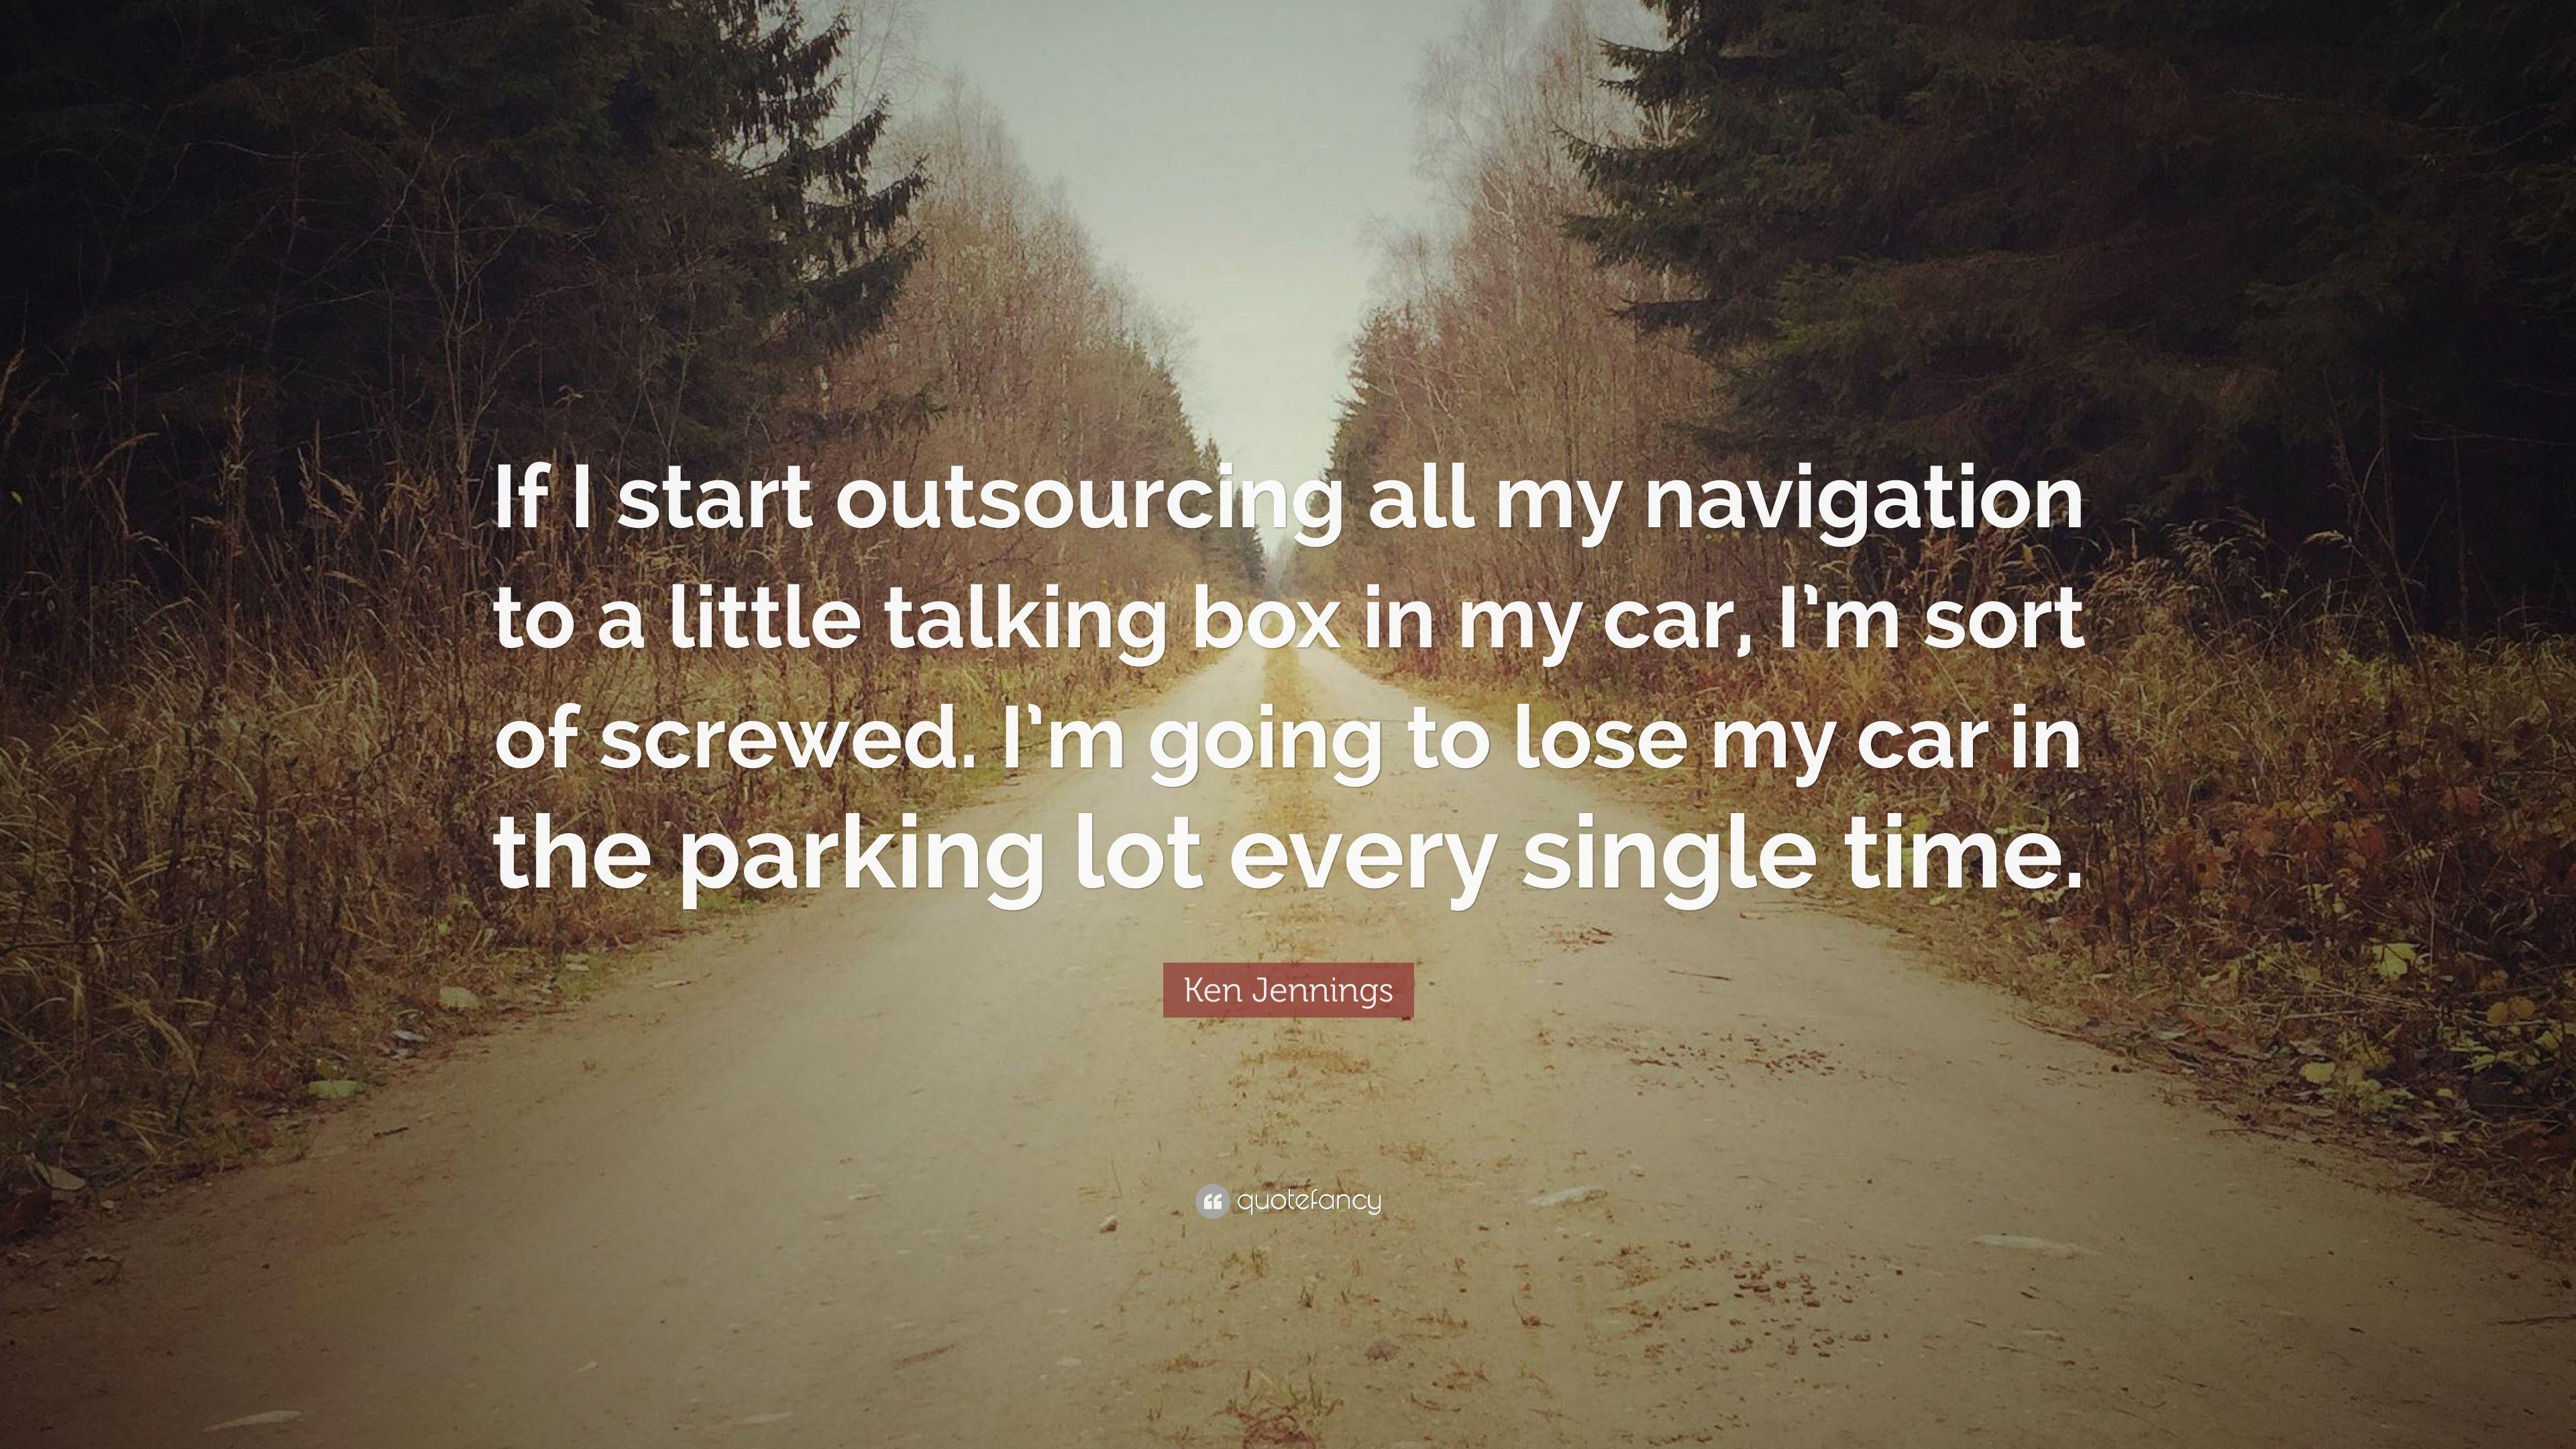 Ken Jennings Quote: “If I start outsourcing all my navigation to a